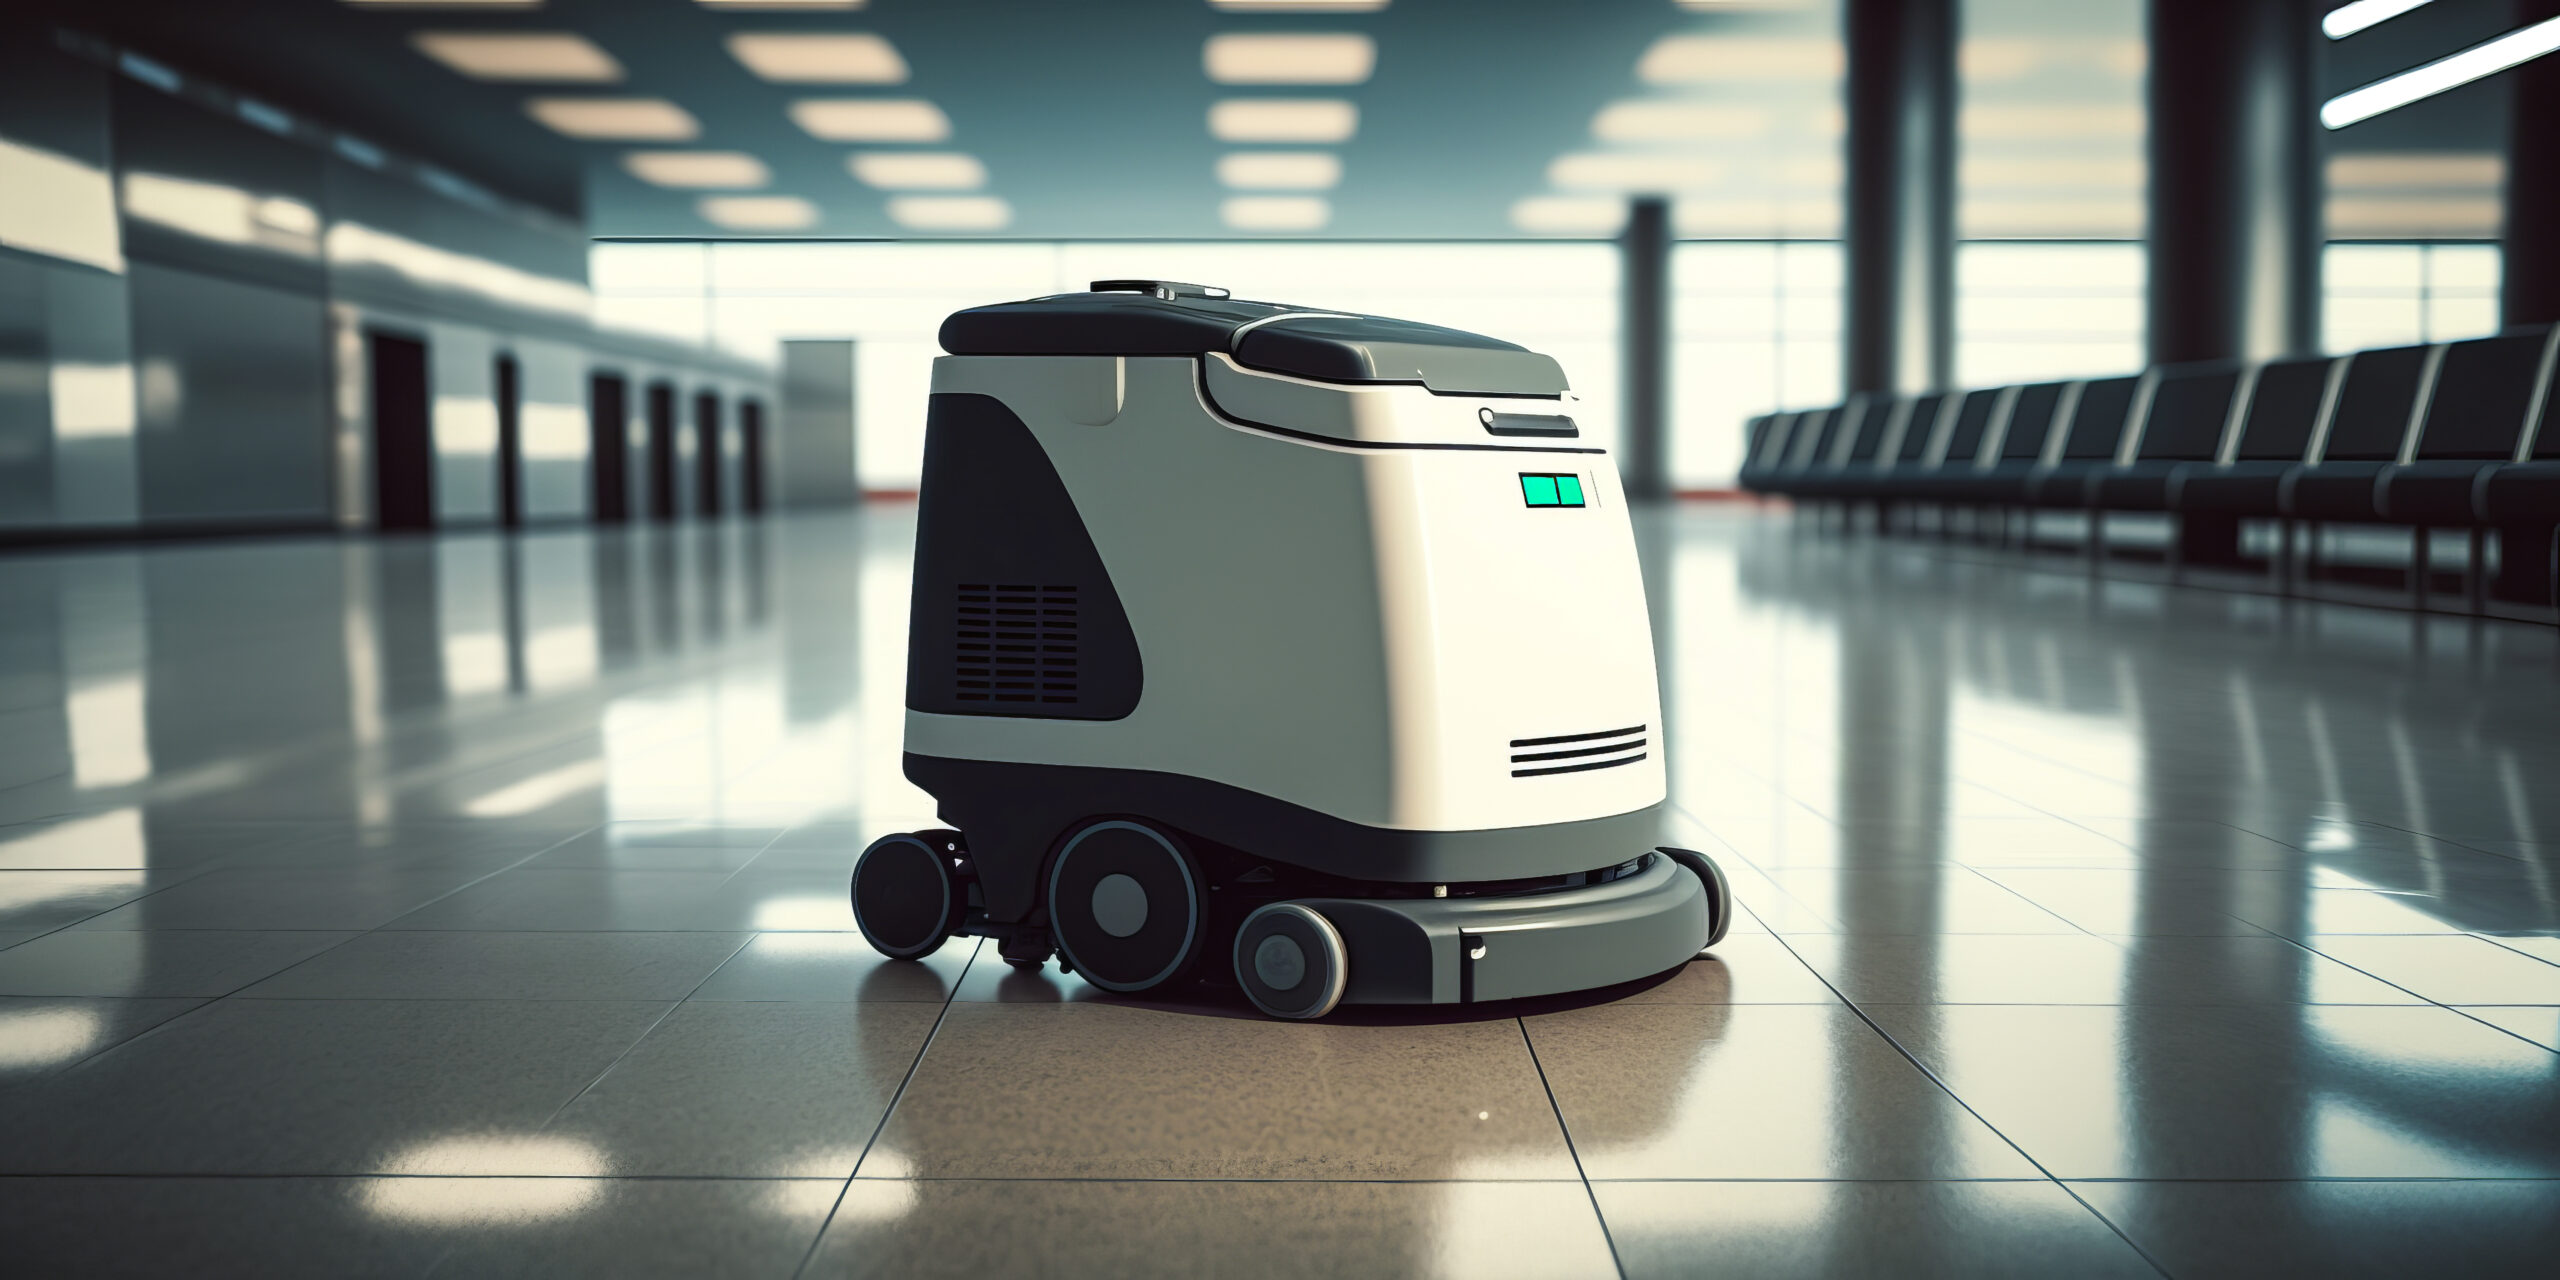 High-tech floor cleaning robot operates in a modern commercial area, showcasing innovation for tech companies and facility management.